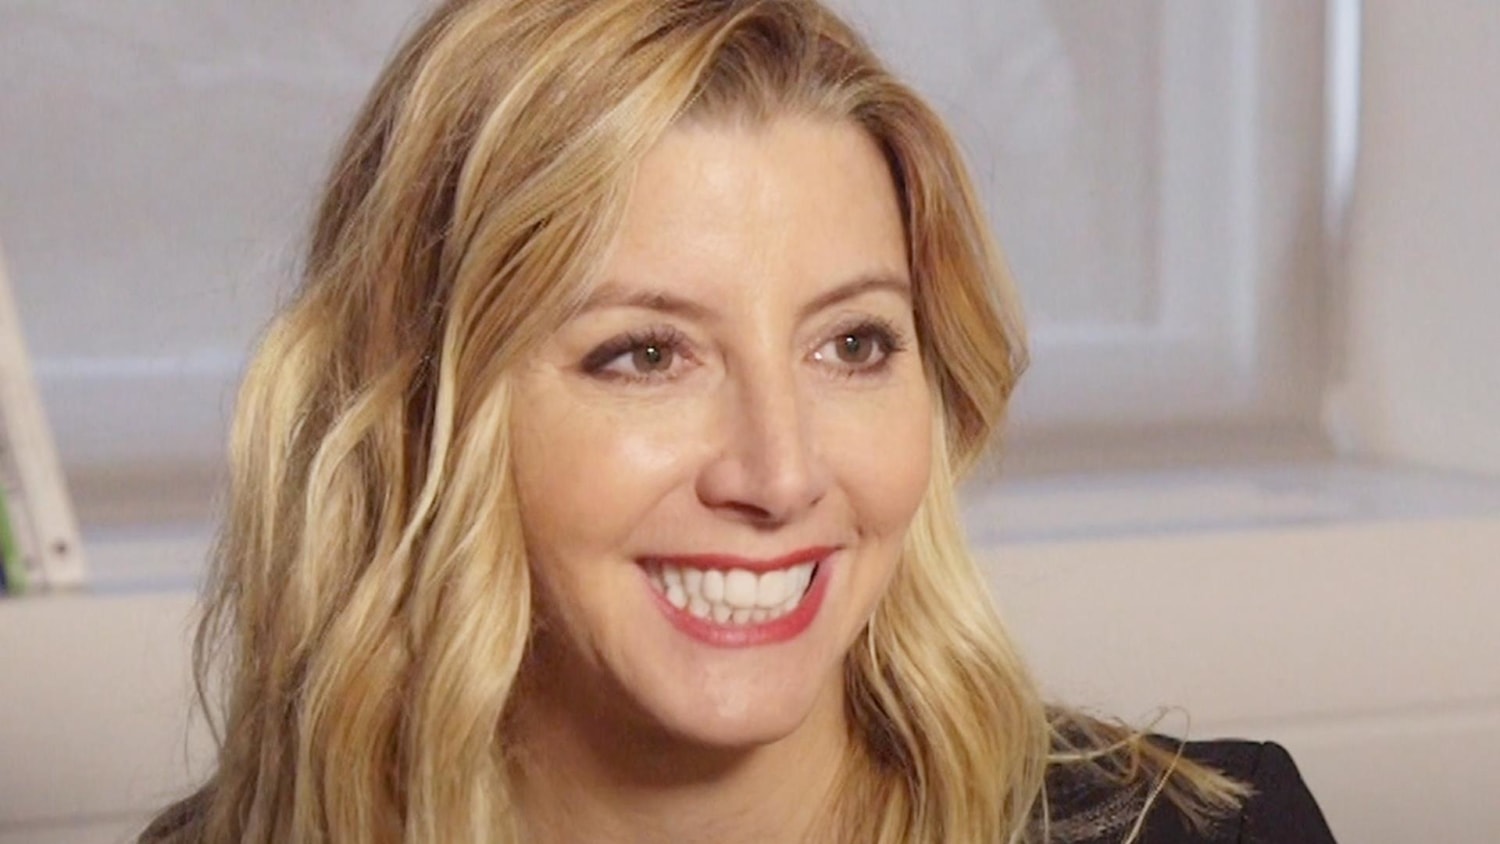 Spanx founder Sara Blakely on the dinnertime question that helped her  succeed